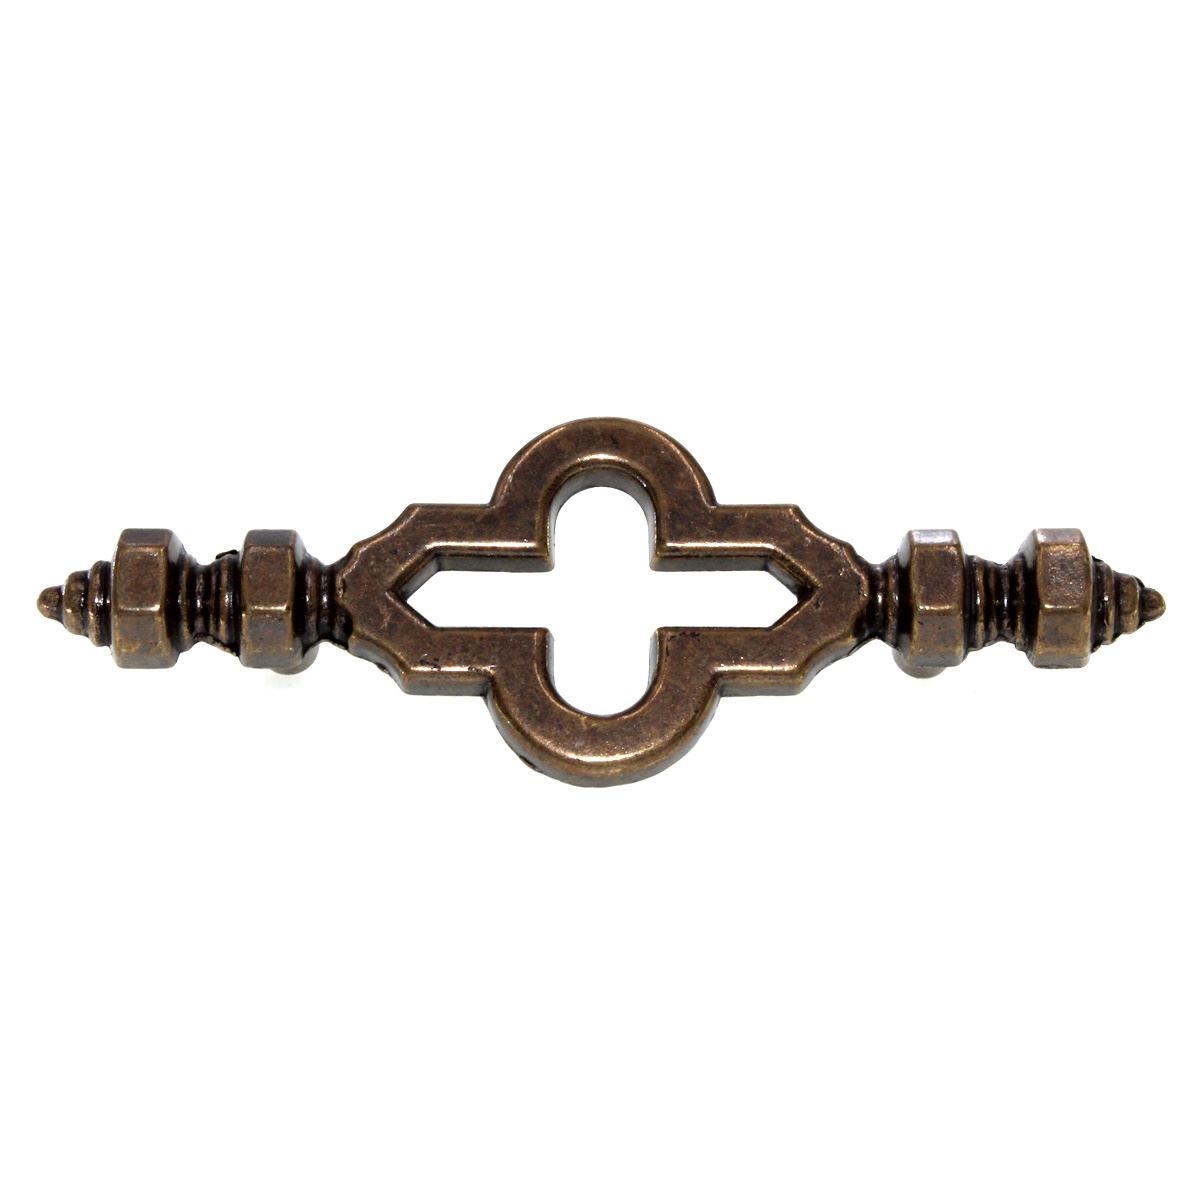 Ornamental Spanish Style Cabinet Bar Pull 3" Ctr Antique Brass 1088-AB